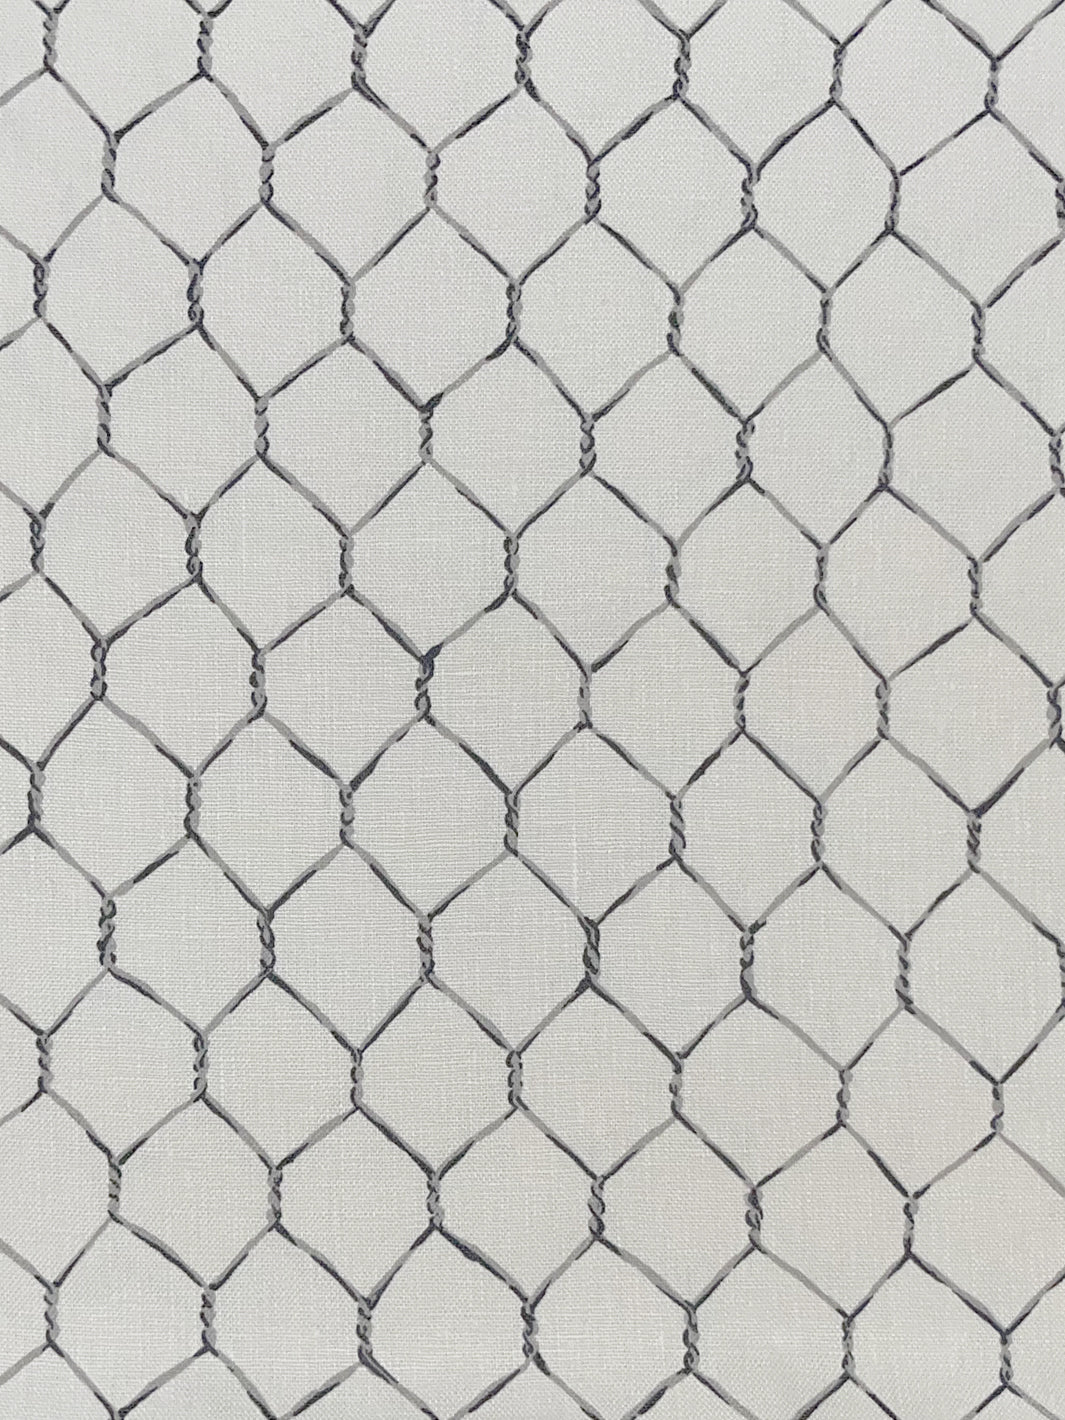 'Evelyn's Chicken Wire' Linen Fabric by Sarah Jessica Parker - Metal on Silver